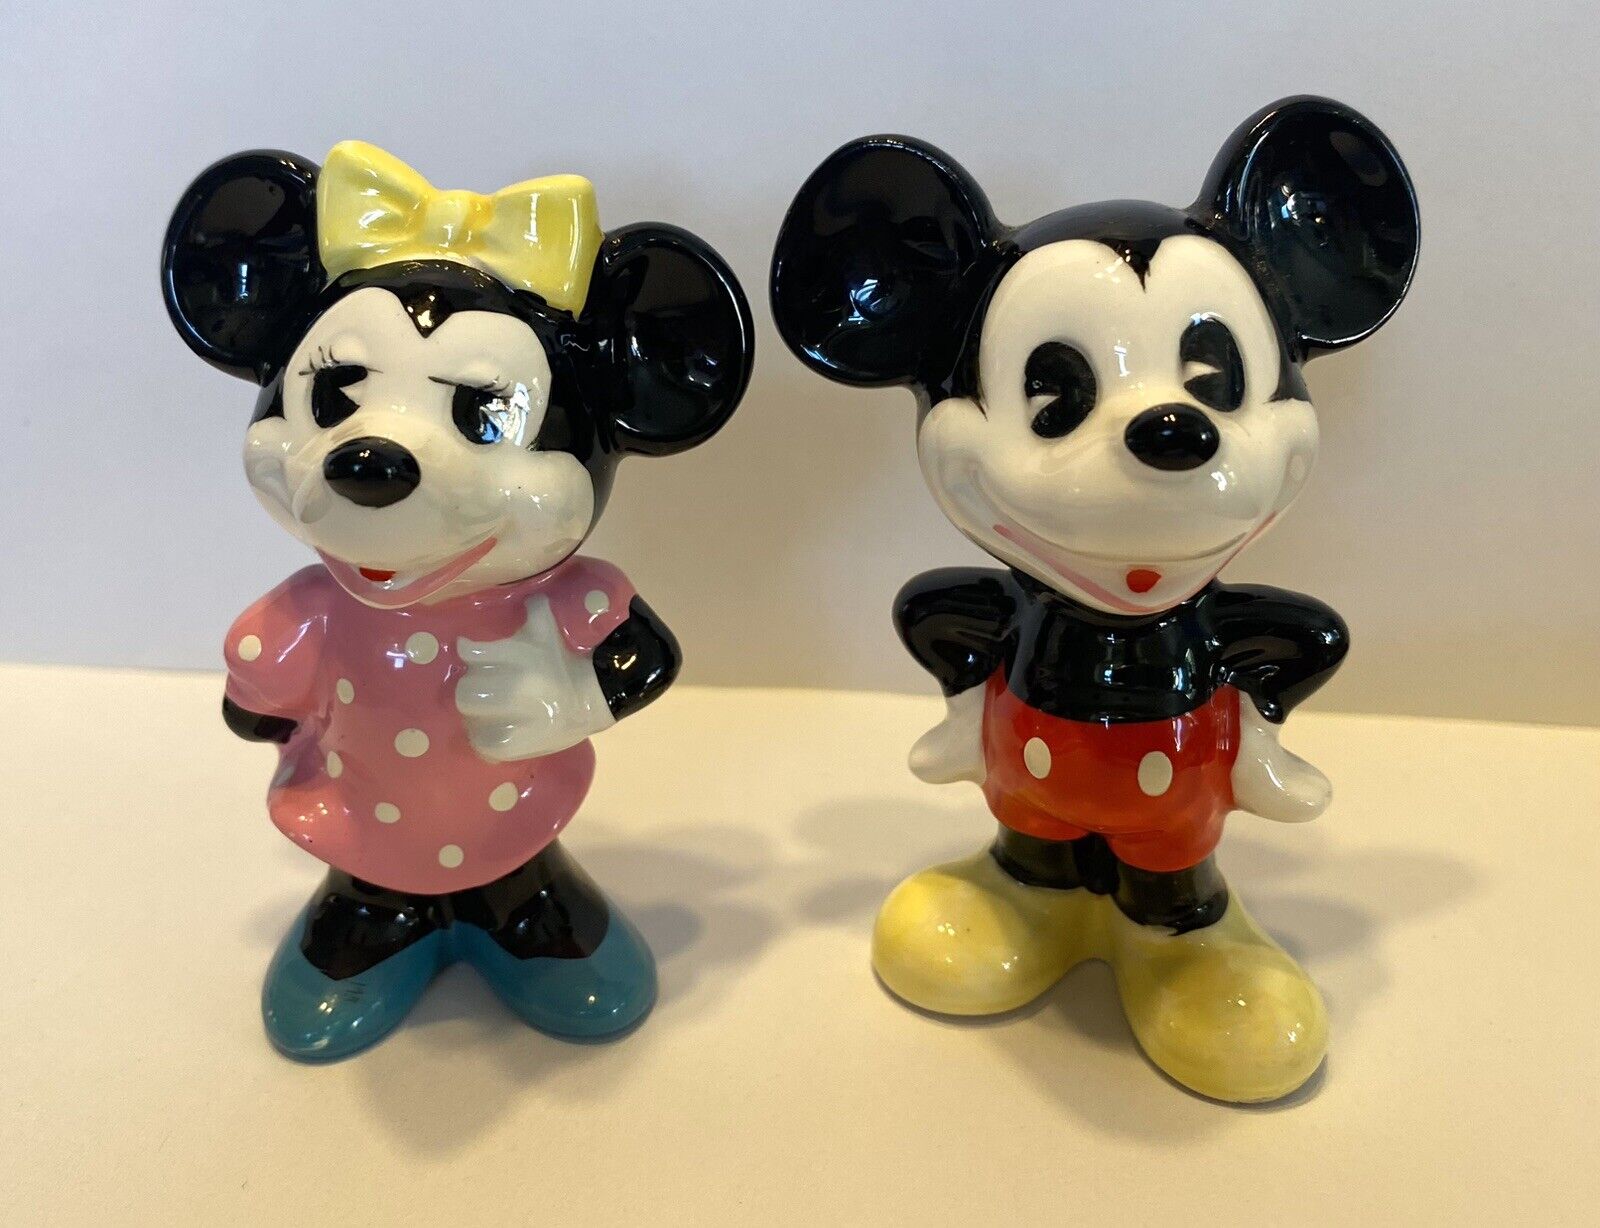 Vintage Disney 3 Inch Mickey and Minnie Mouse Figurines Japan Ceramic